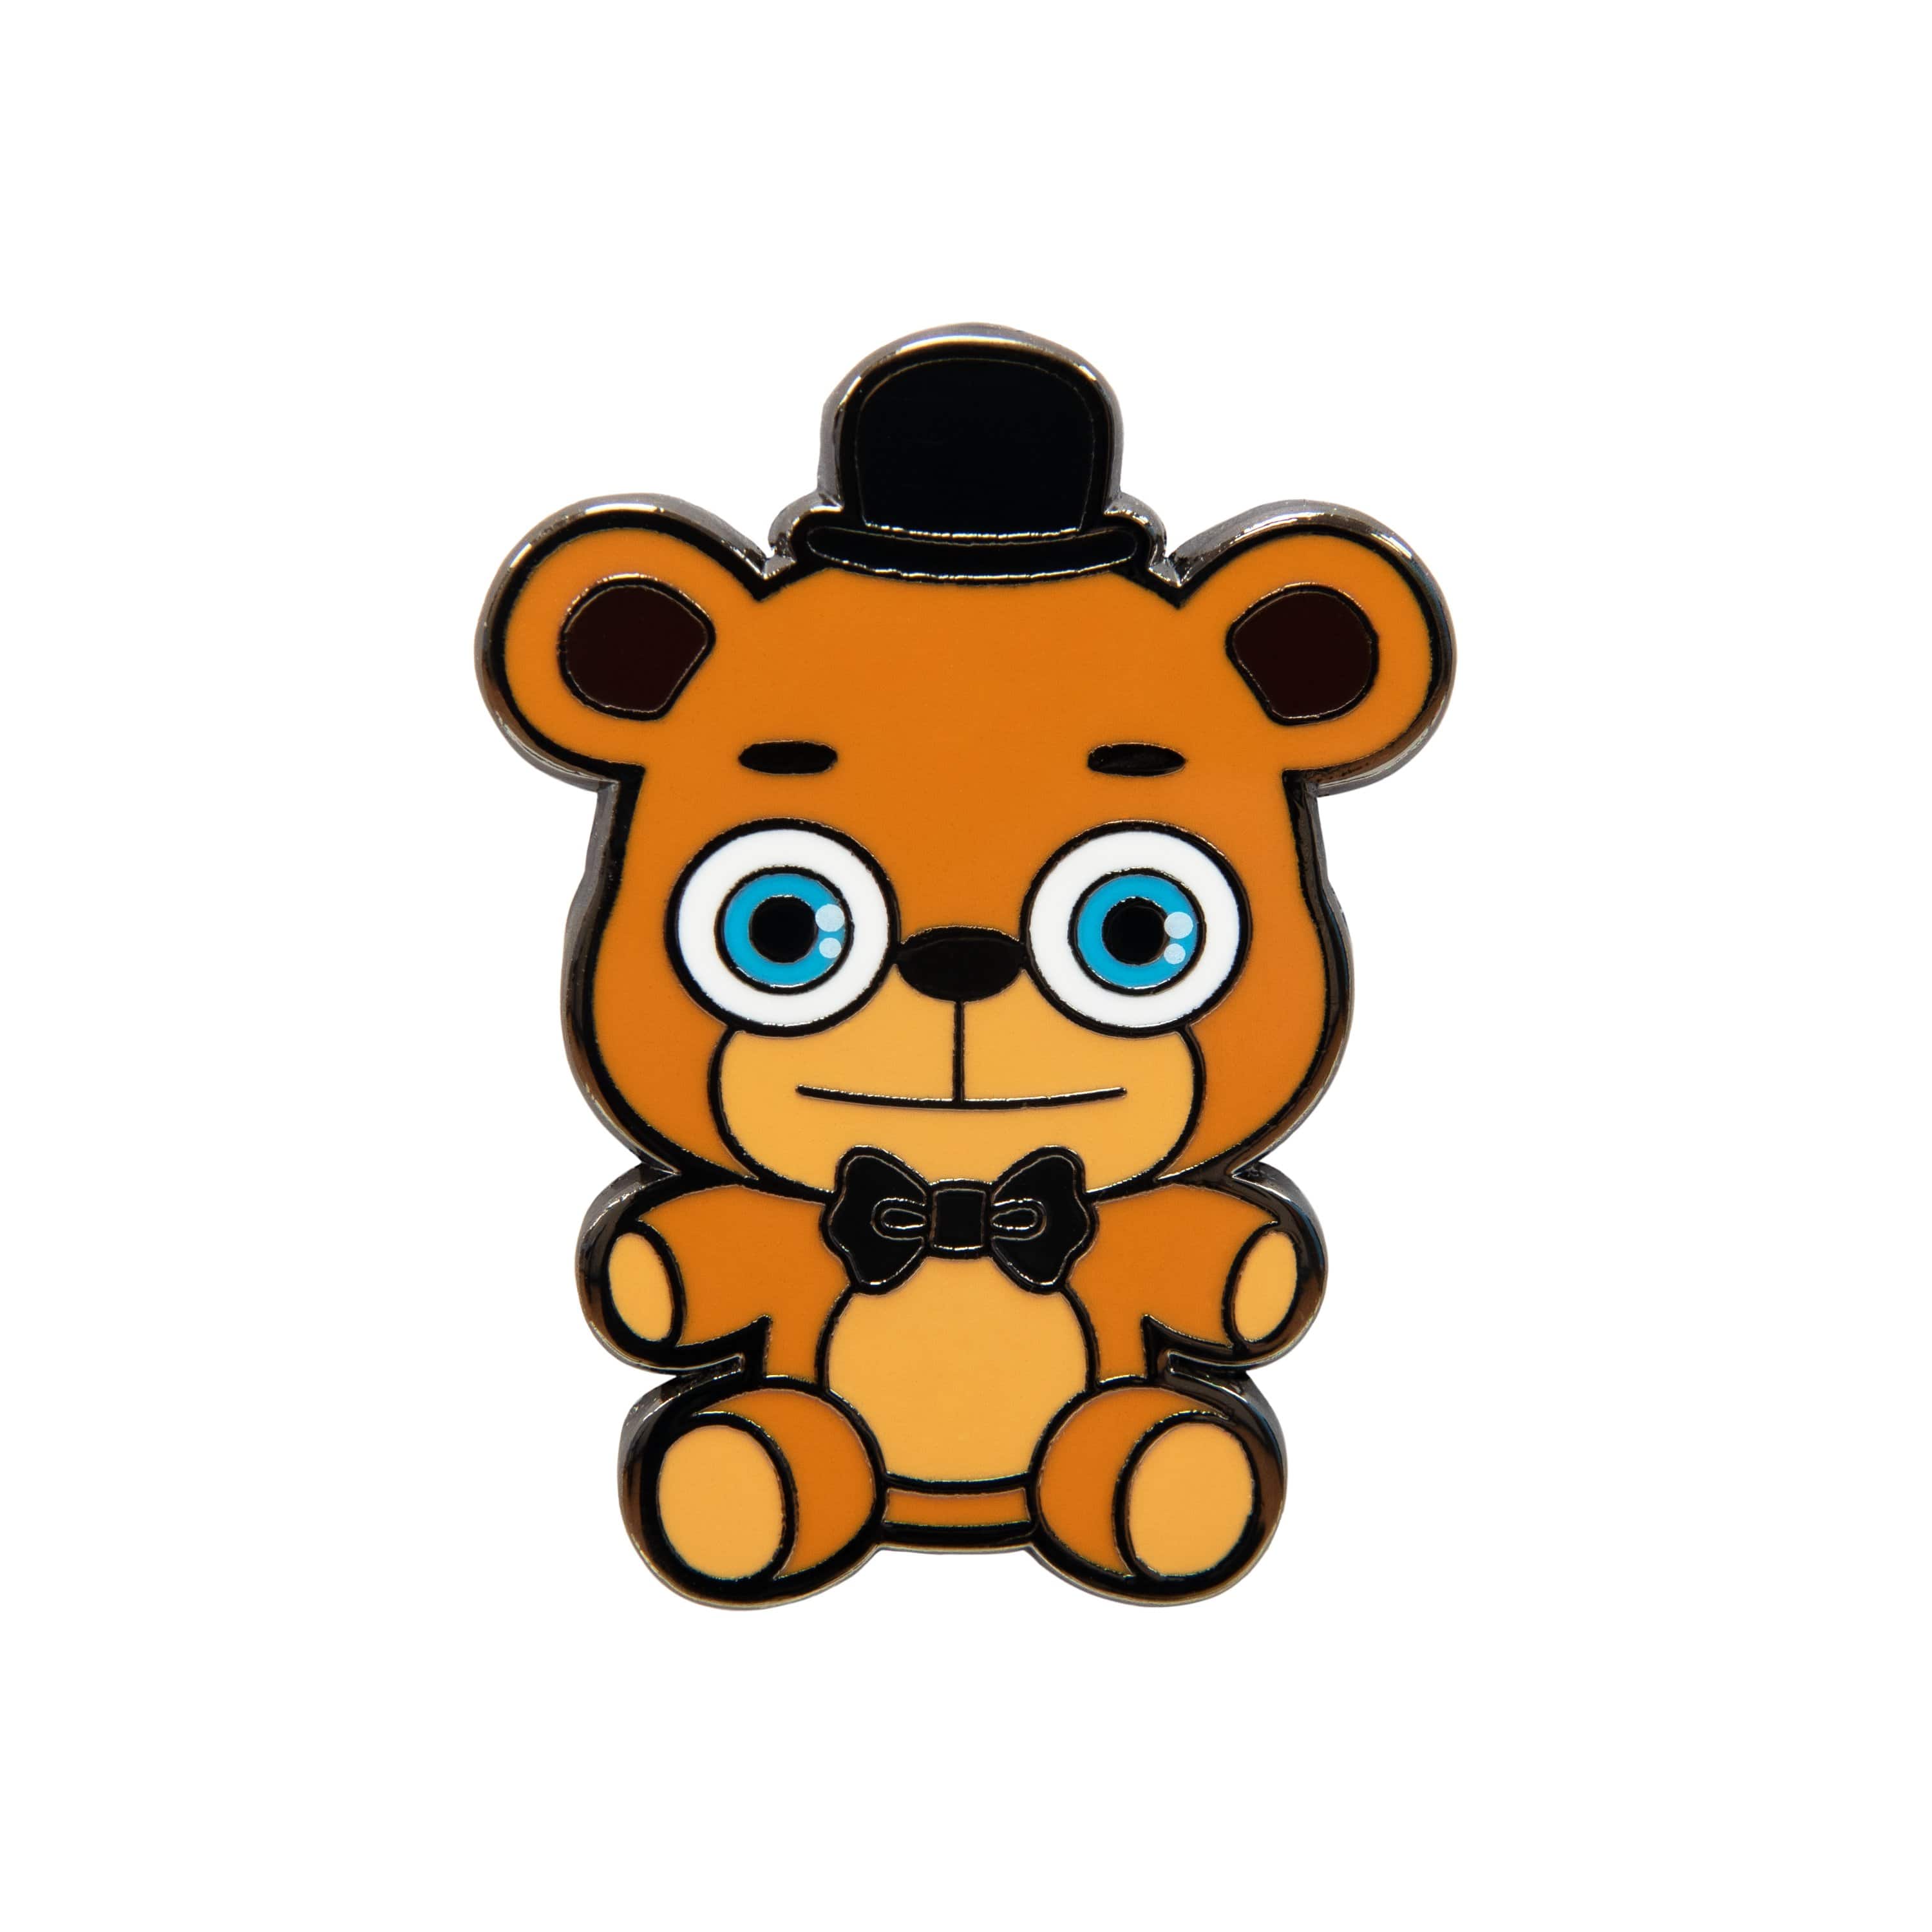 freddy fazbear (five nights at freddy's and 1 more) drawn by